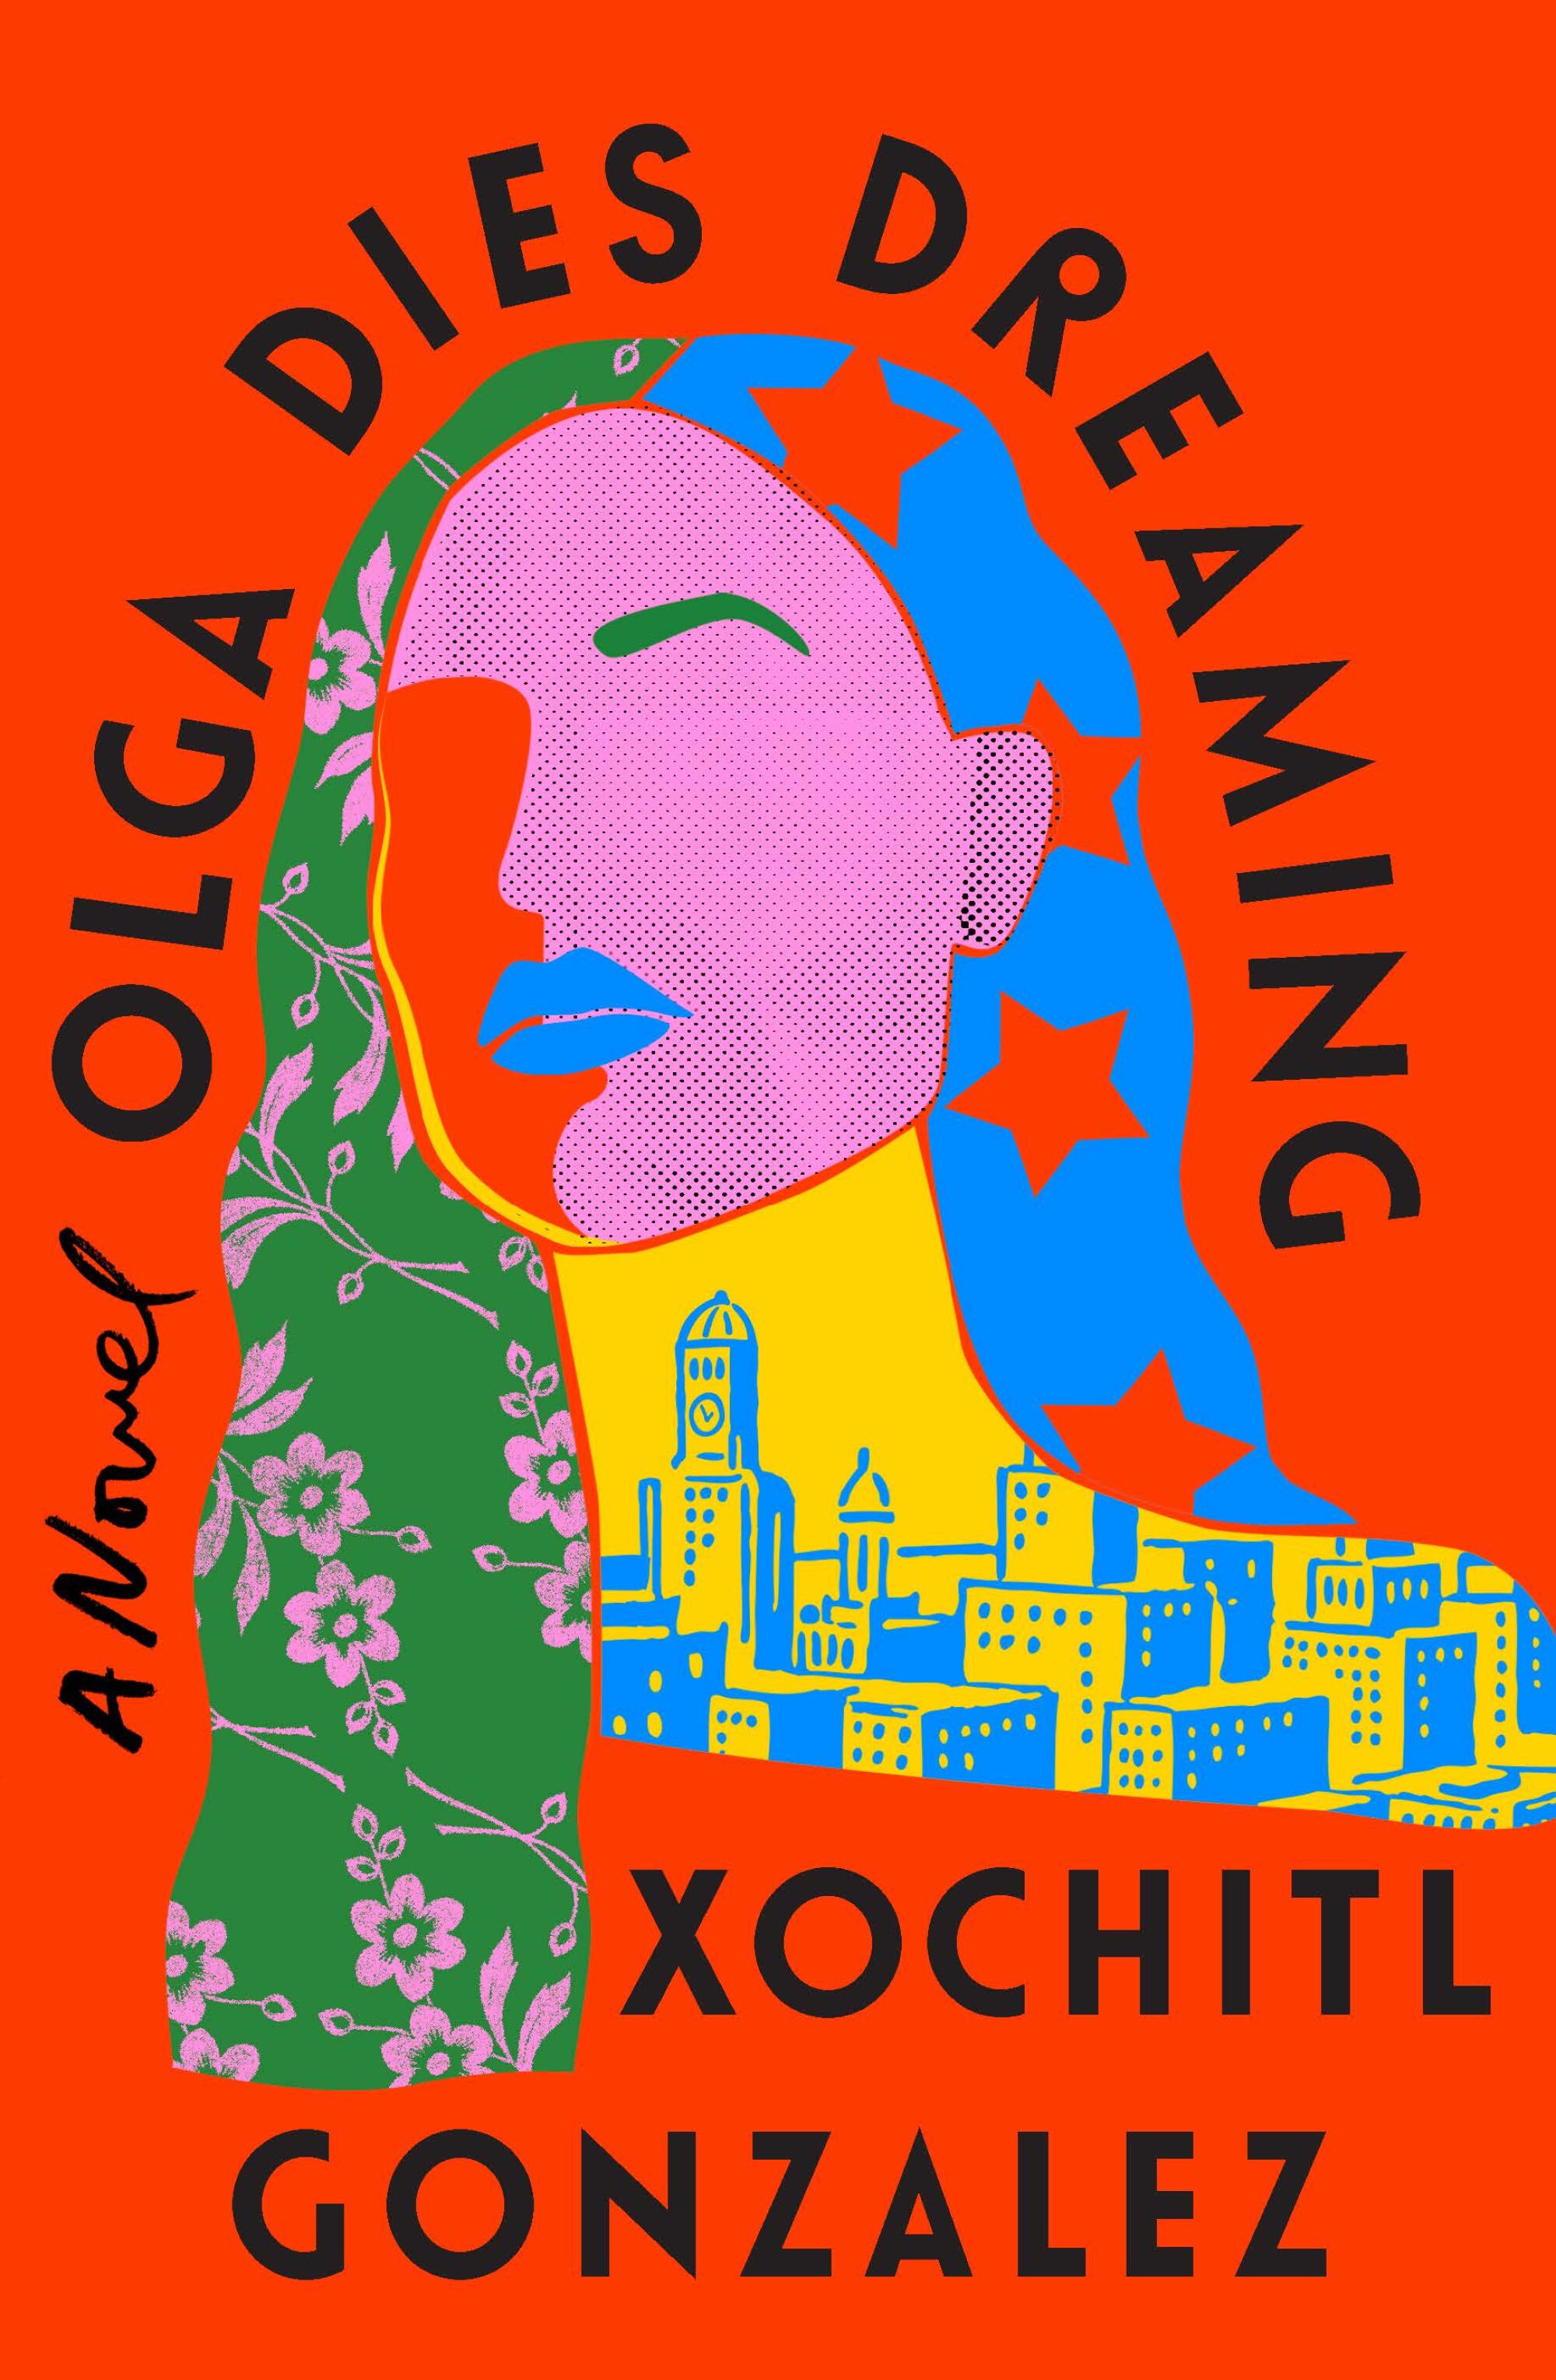 Cover image of "Olga Dies Dreaming" is illustration of woman made up of different patterns